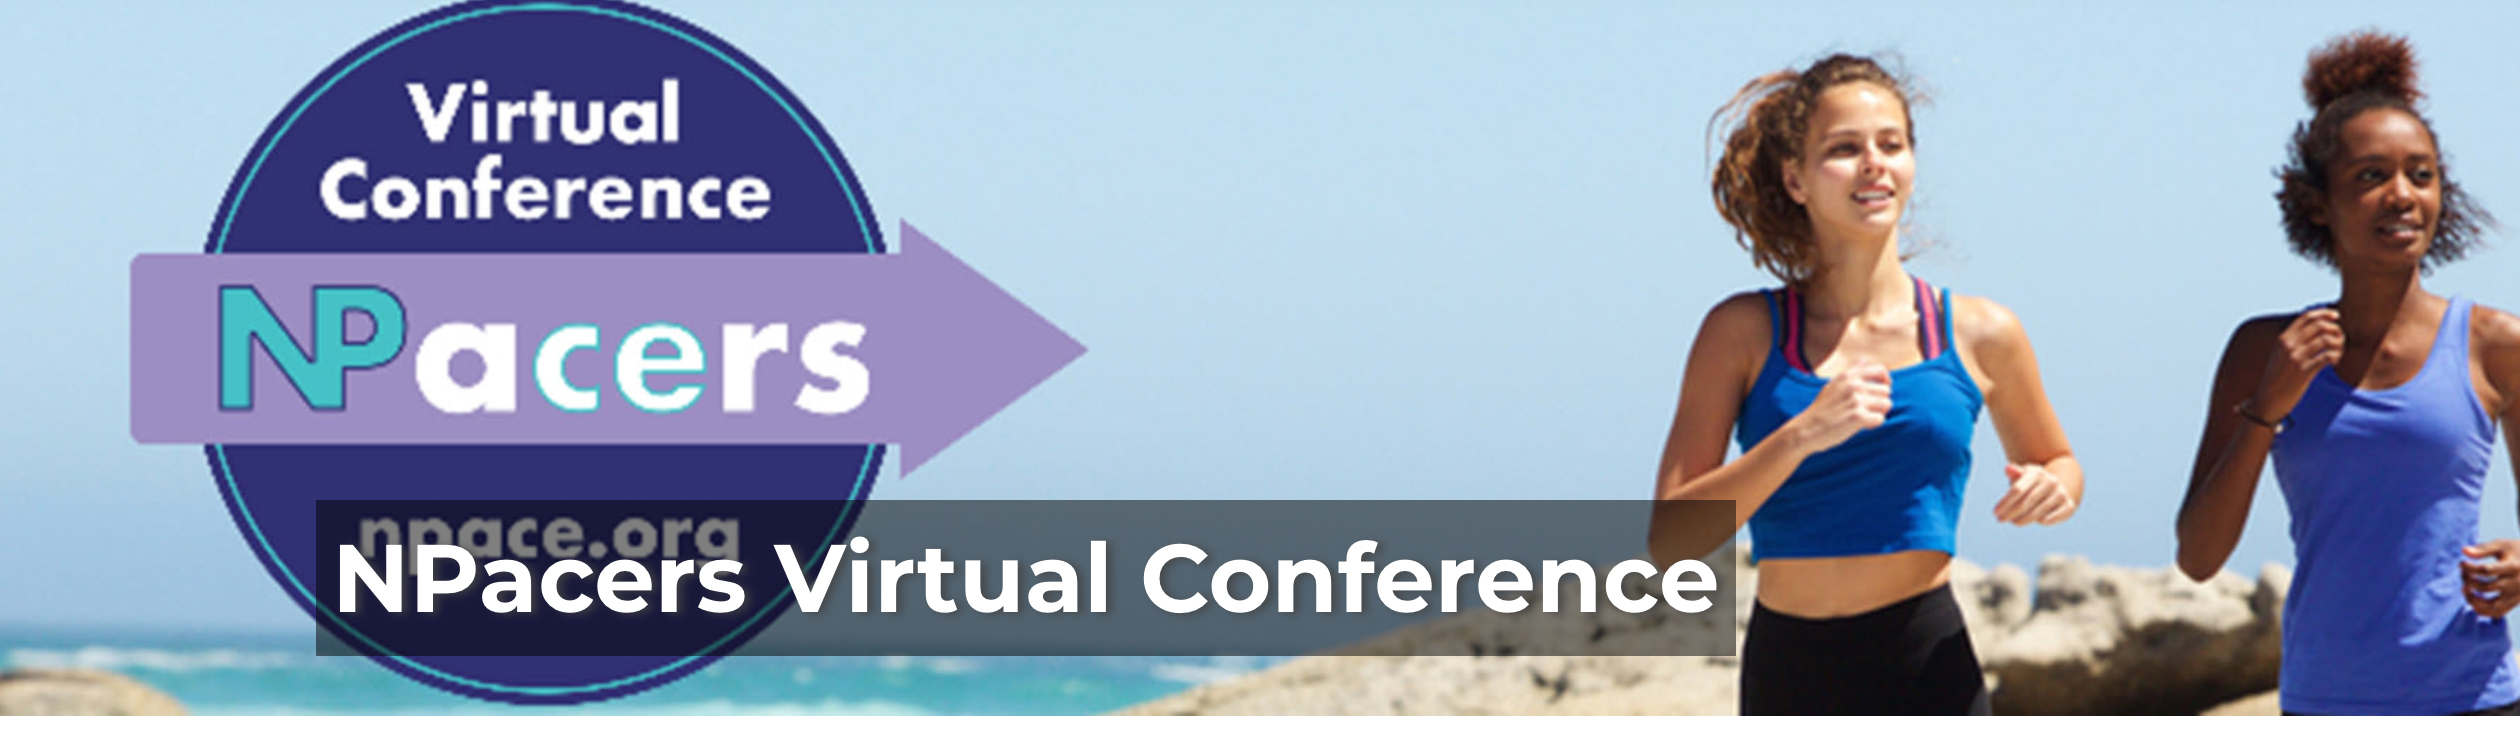 NPacers Virtual Conference 2020